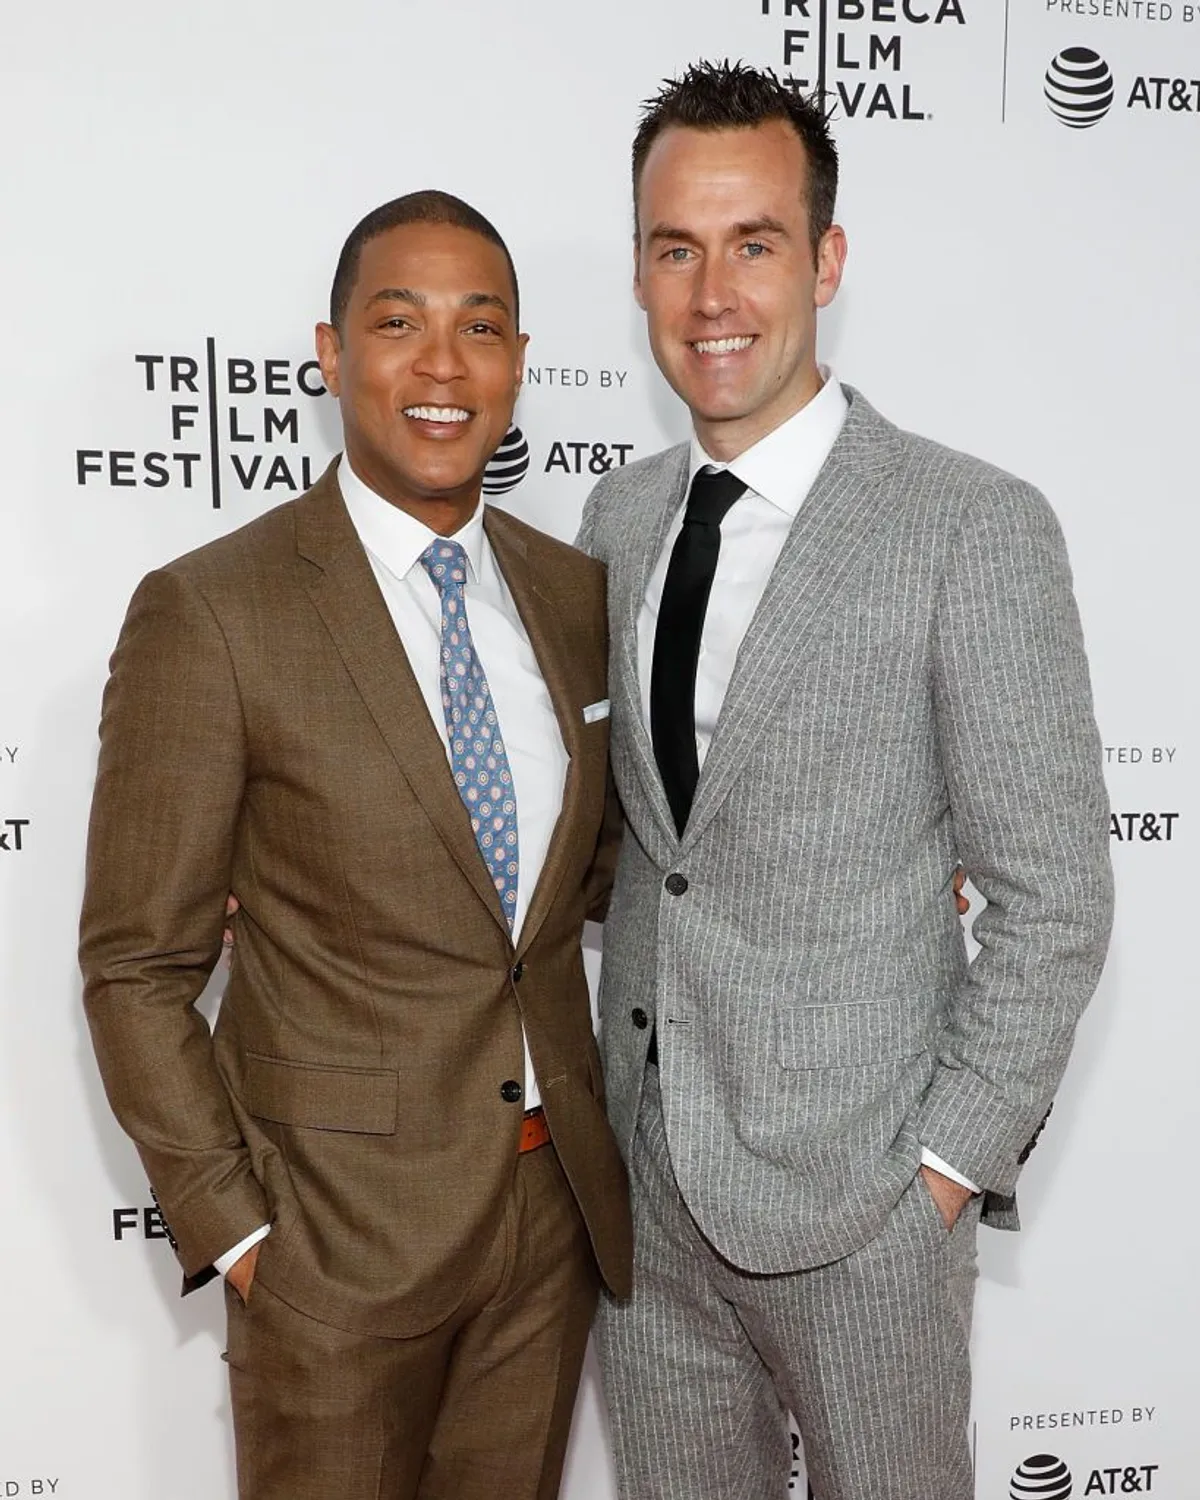 Don Lemon and fiancé Tim Malone at the "Clive Davis: The Soundtrack Of Our Lives" opening gala of the Tribeca Film Festival on April 19, 2017 in New York City | Photo: Getty Images